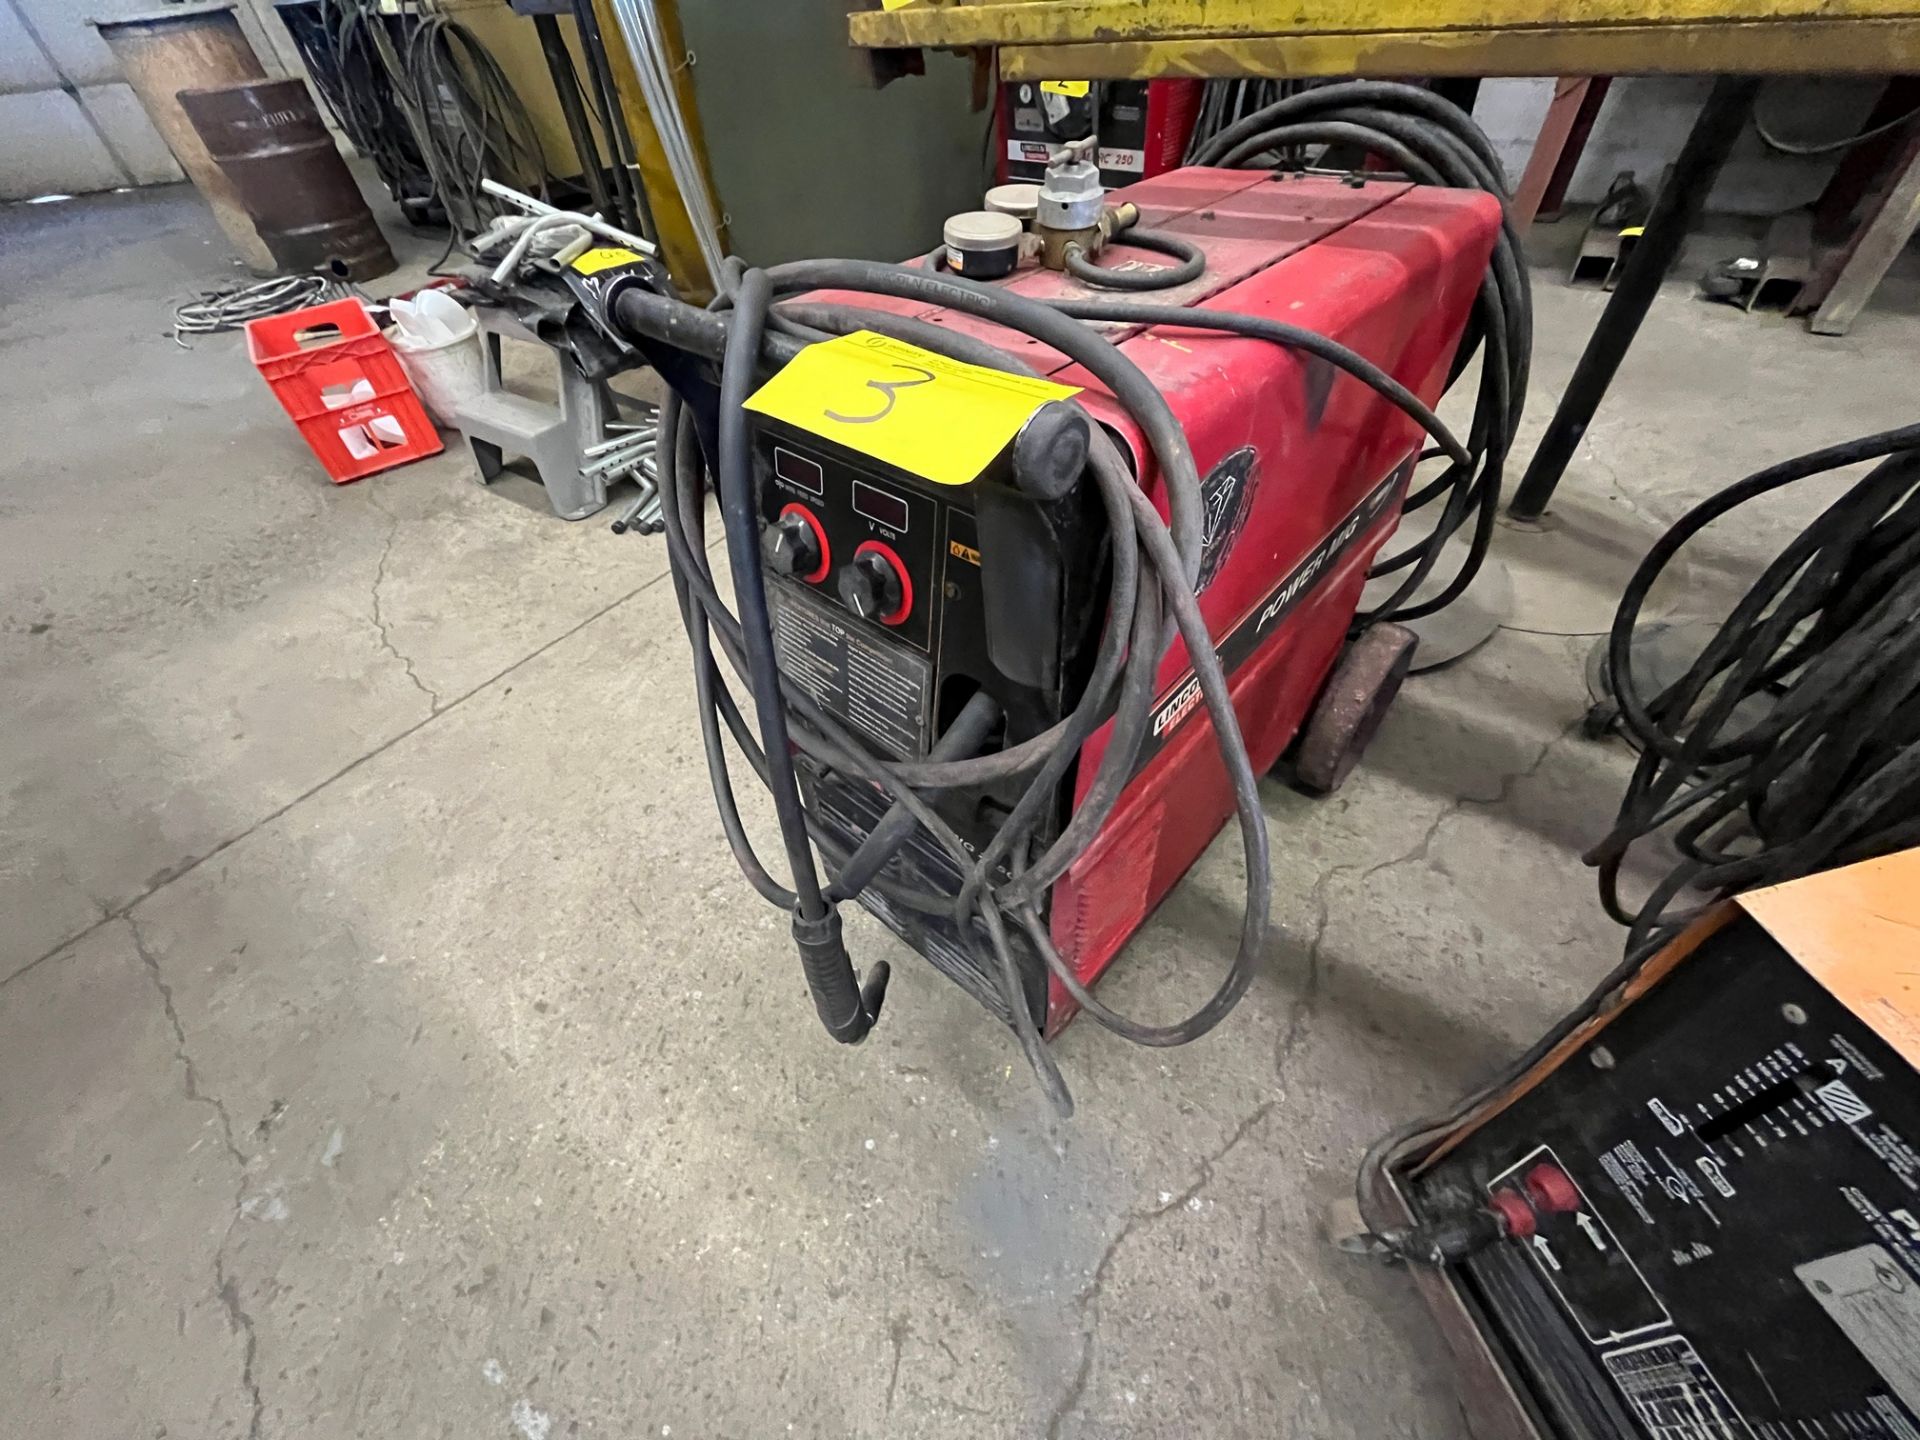 LINCOLN ELECTRIC POWER MIG 255C WELDER W/ CART, CABLES (NO TANKS) - Image 2 of 5